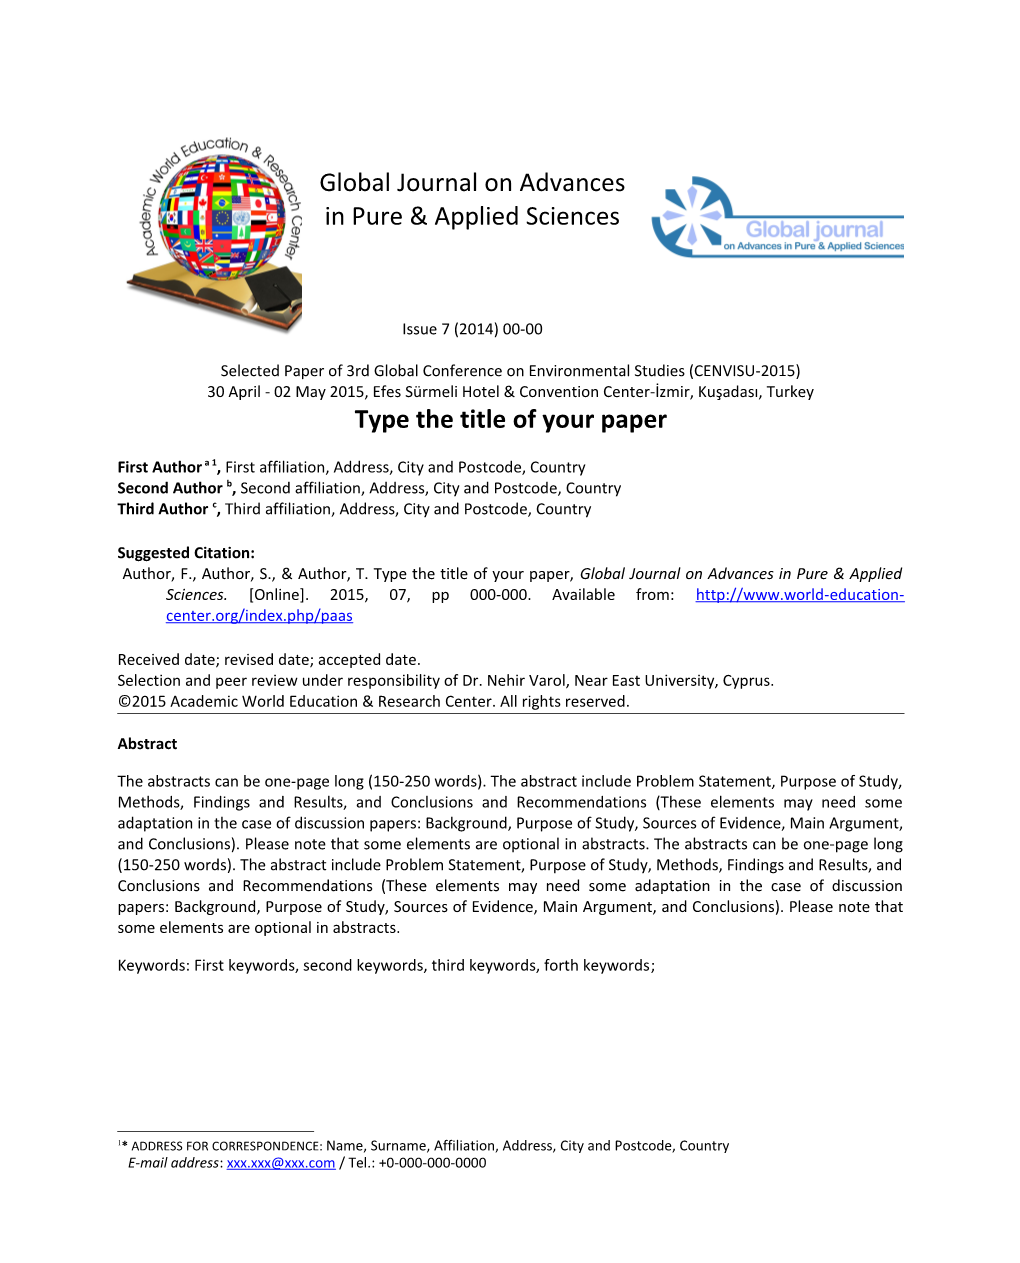 Selected Paper of 3Rd Global Conference on Environmental Studies (CENVISU-2015)